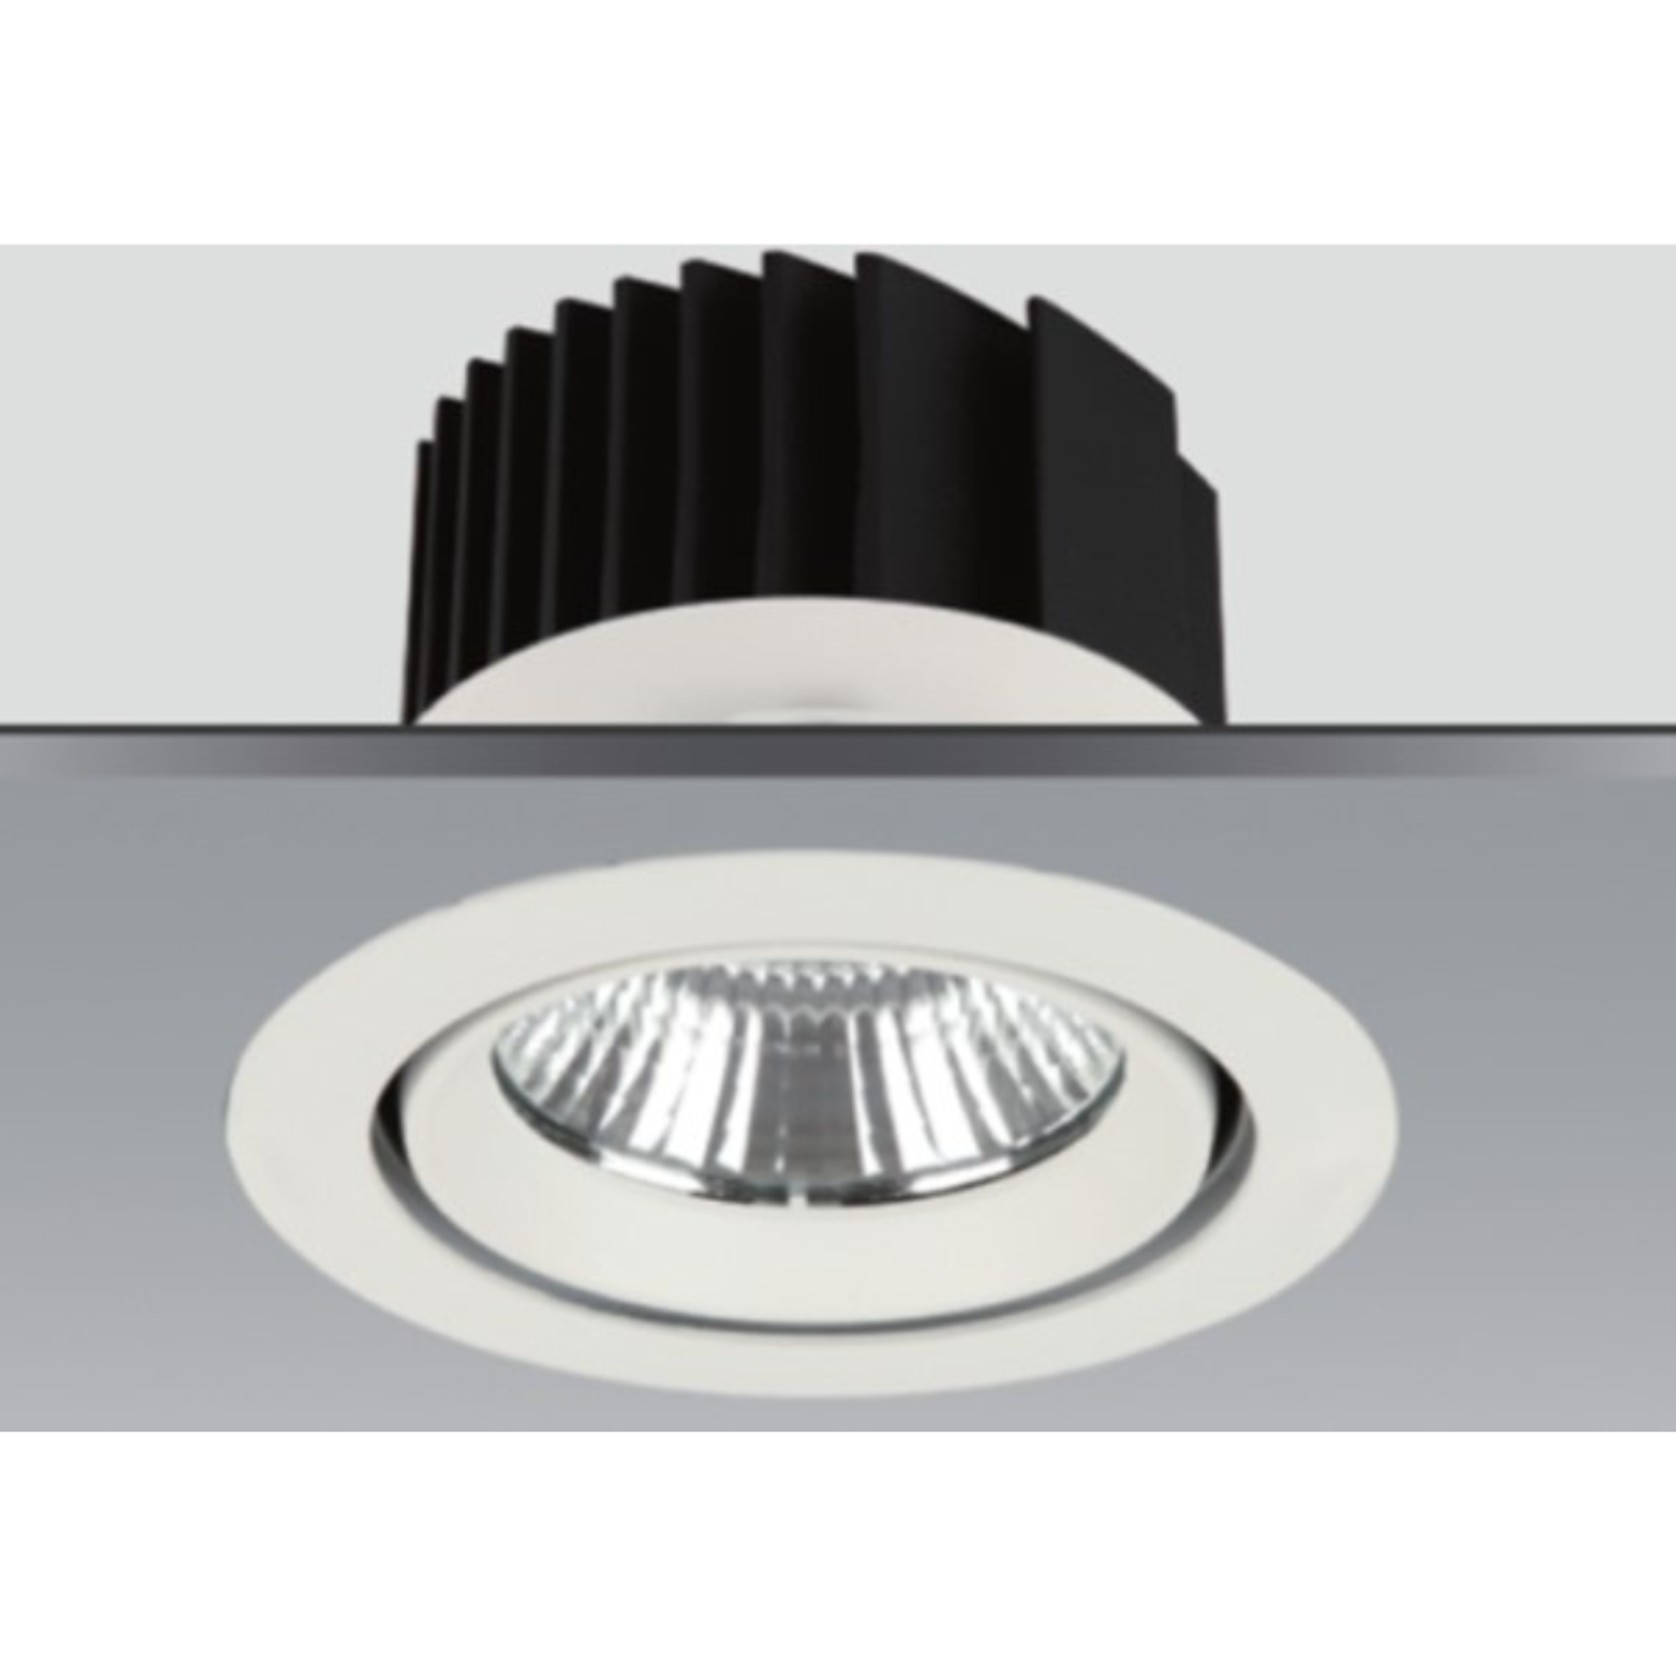 LED Commercial Downlight gallery detail image